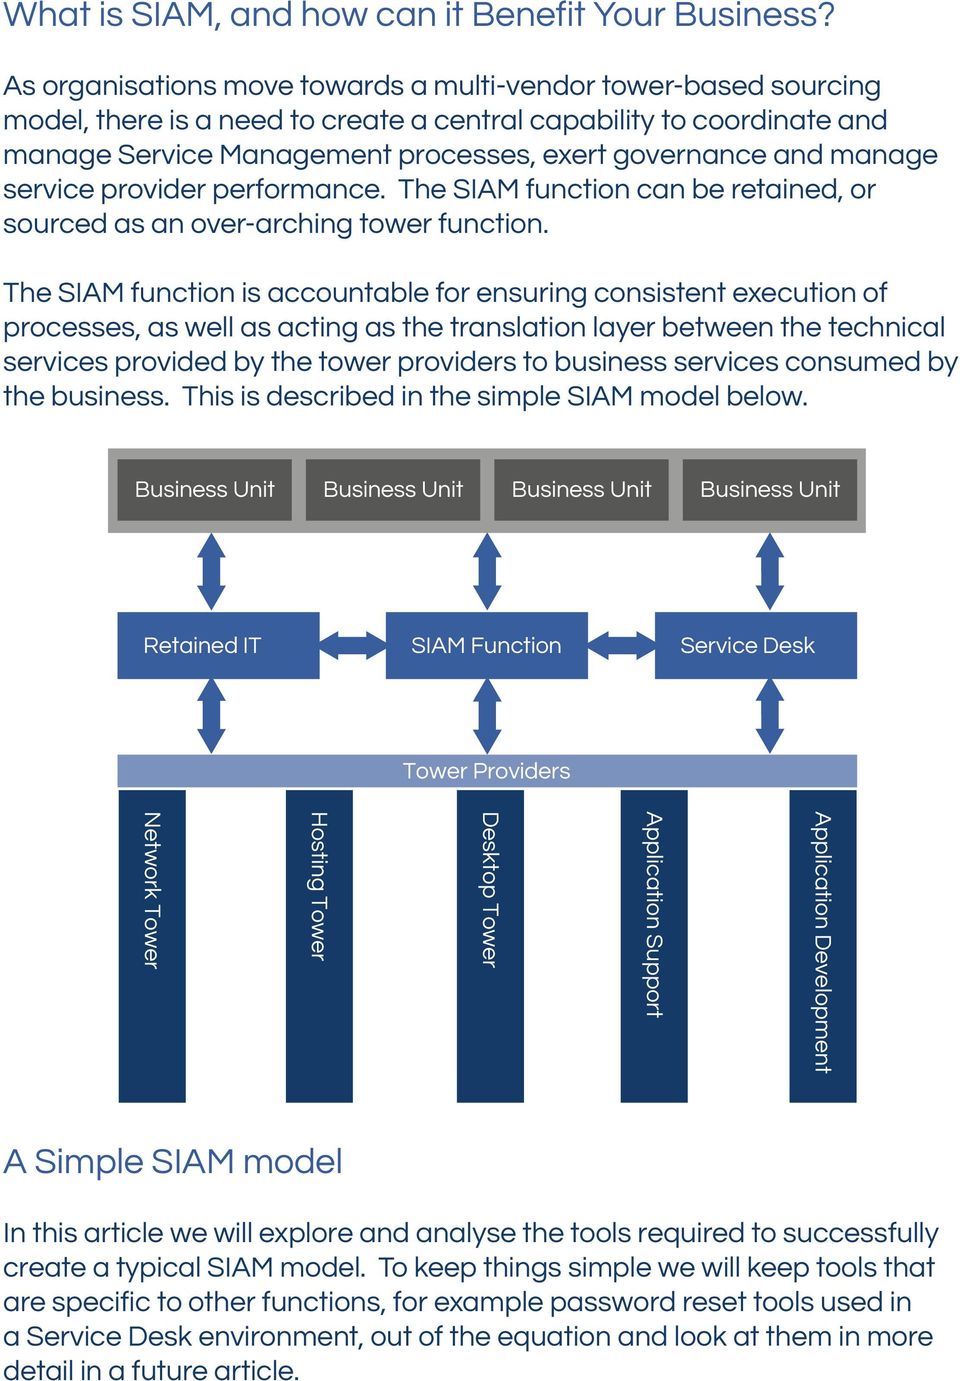 manage service provider performance. The SIAM function can be retained, or sourced as an over-arching tower function.